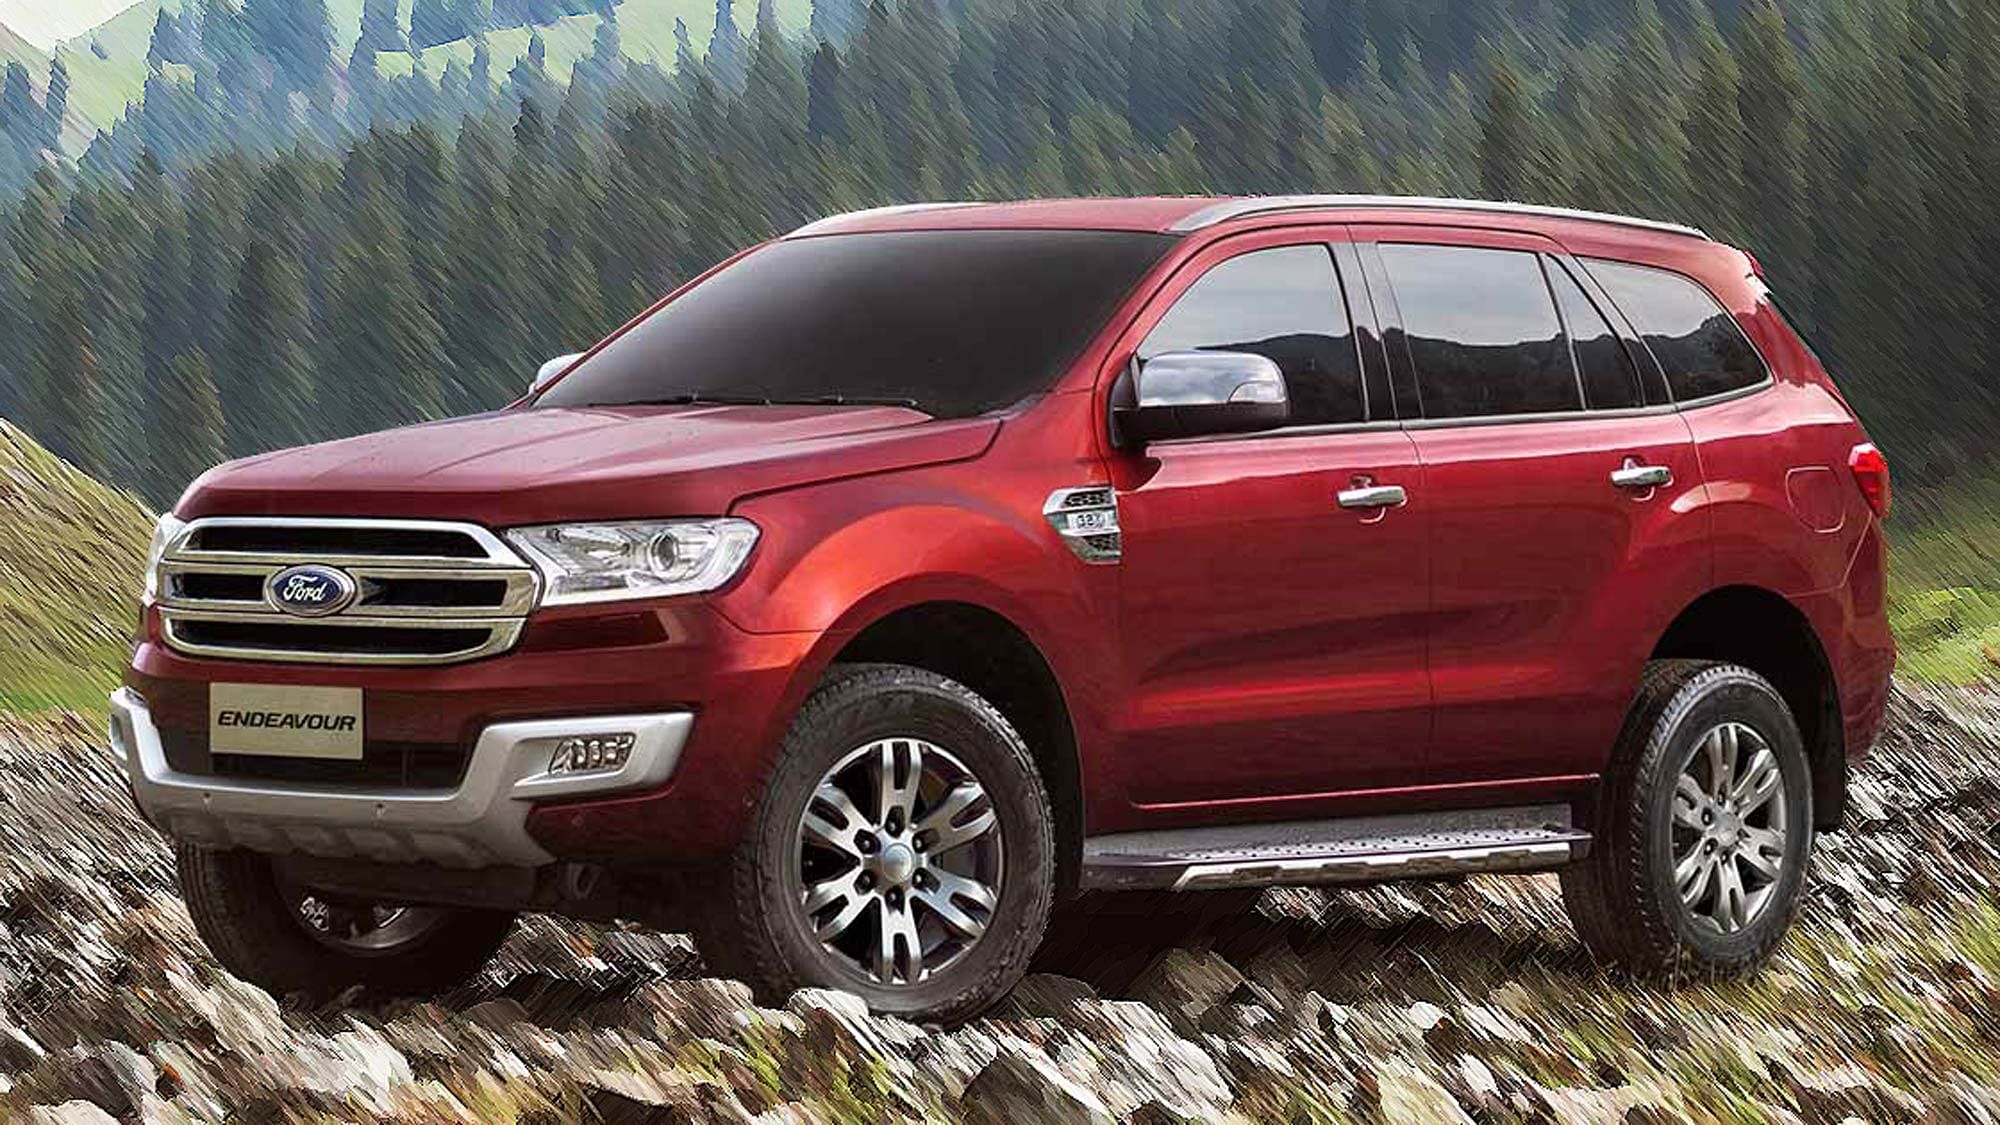 2016 Ford Endeavour. (Photo Courtesy: <a href="http://www.india.ford.com/suvs/endeavour">Ford India</a>)